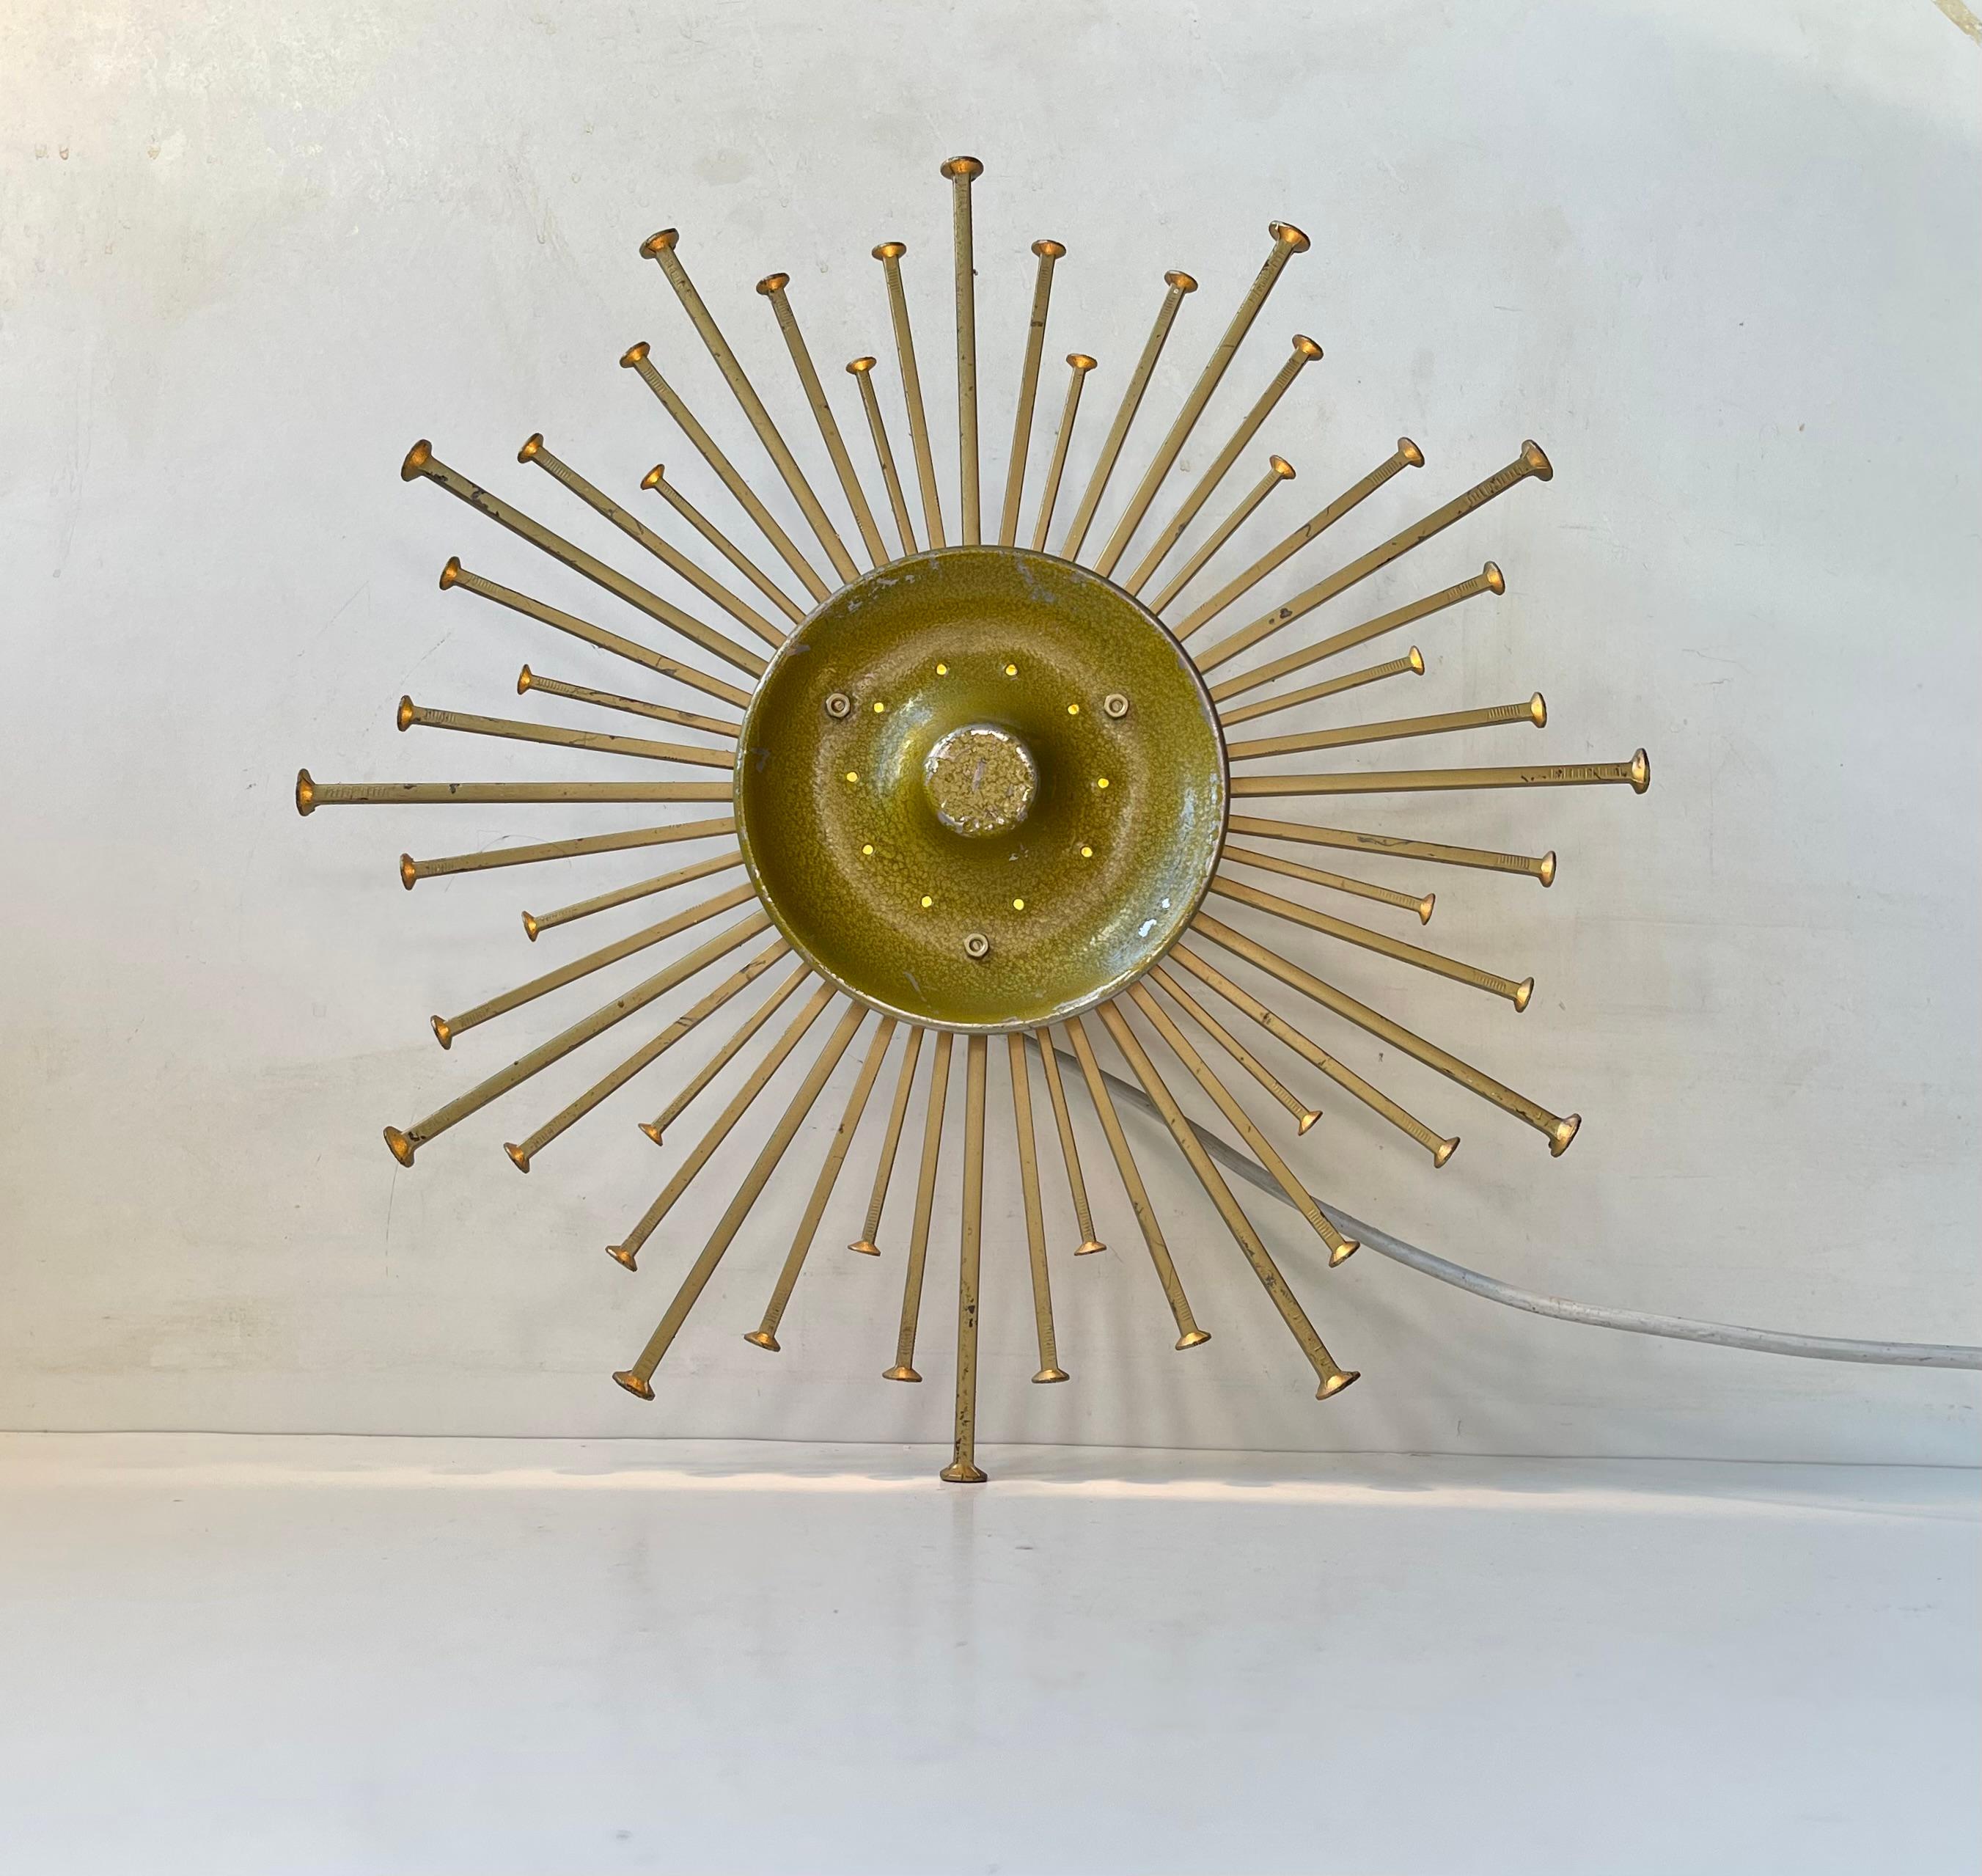 A matching pair of sculptural wall lights depicting a bursting sun or star. Constructed using diffrent sizes large iron nails. Powder-coated gold/yellow. Manufactured and designed in Denmark by Dantoft Metal Art during the 1970s. Very rare to find a